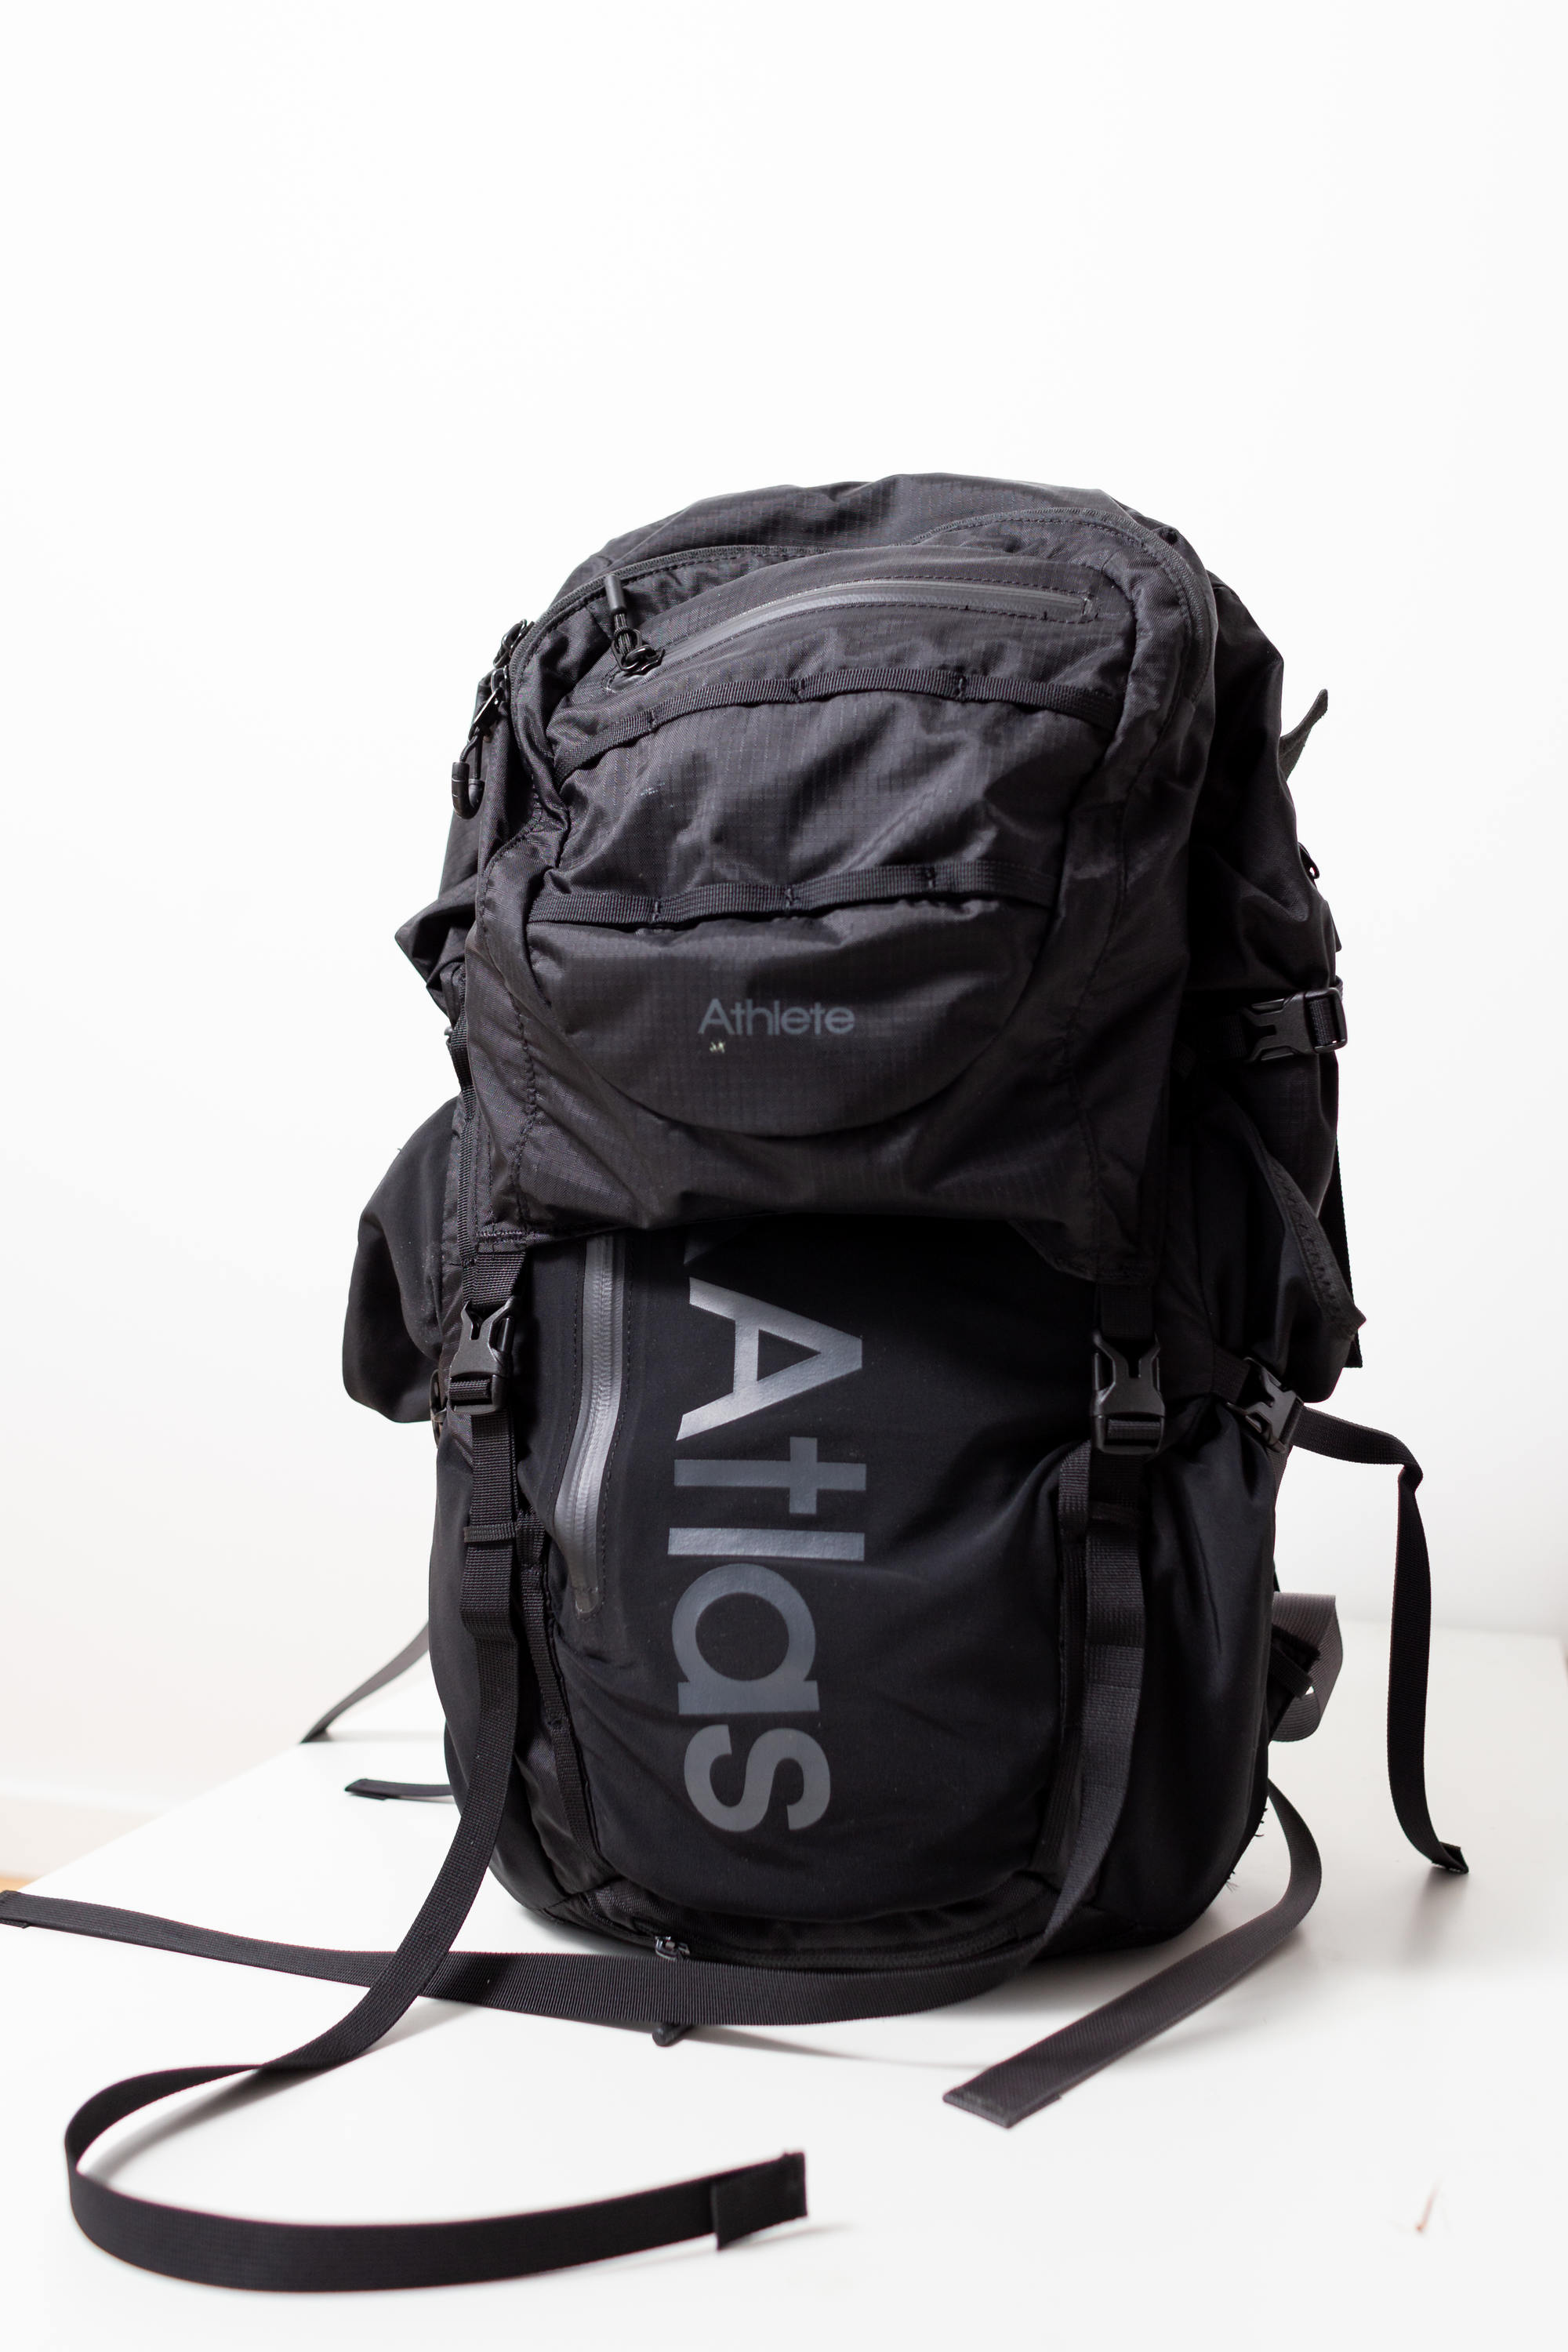 camera-backpack-review-atlas-athlete-02